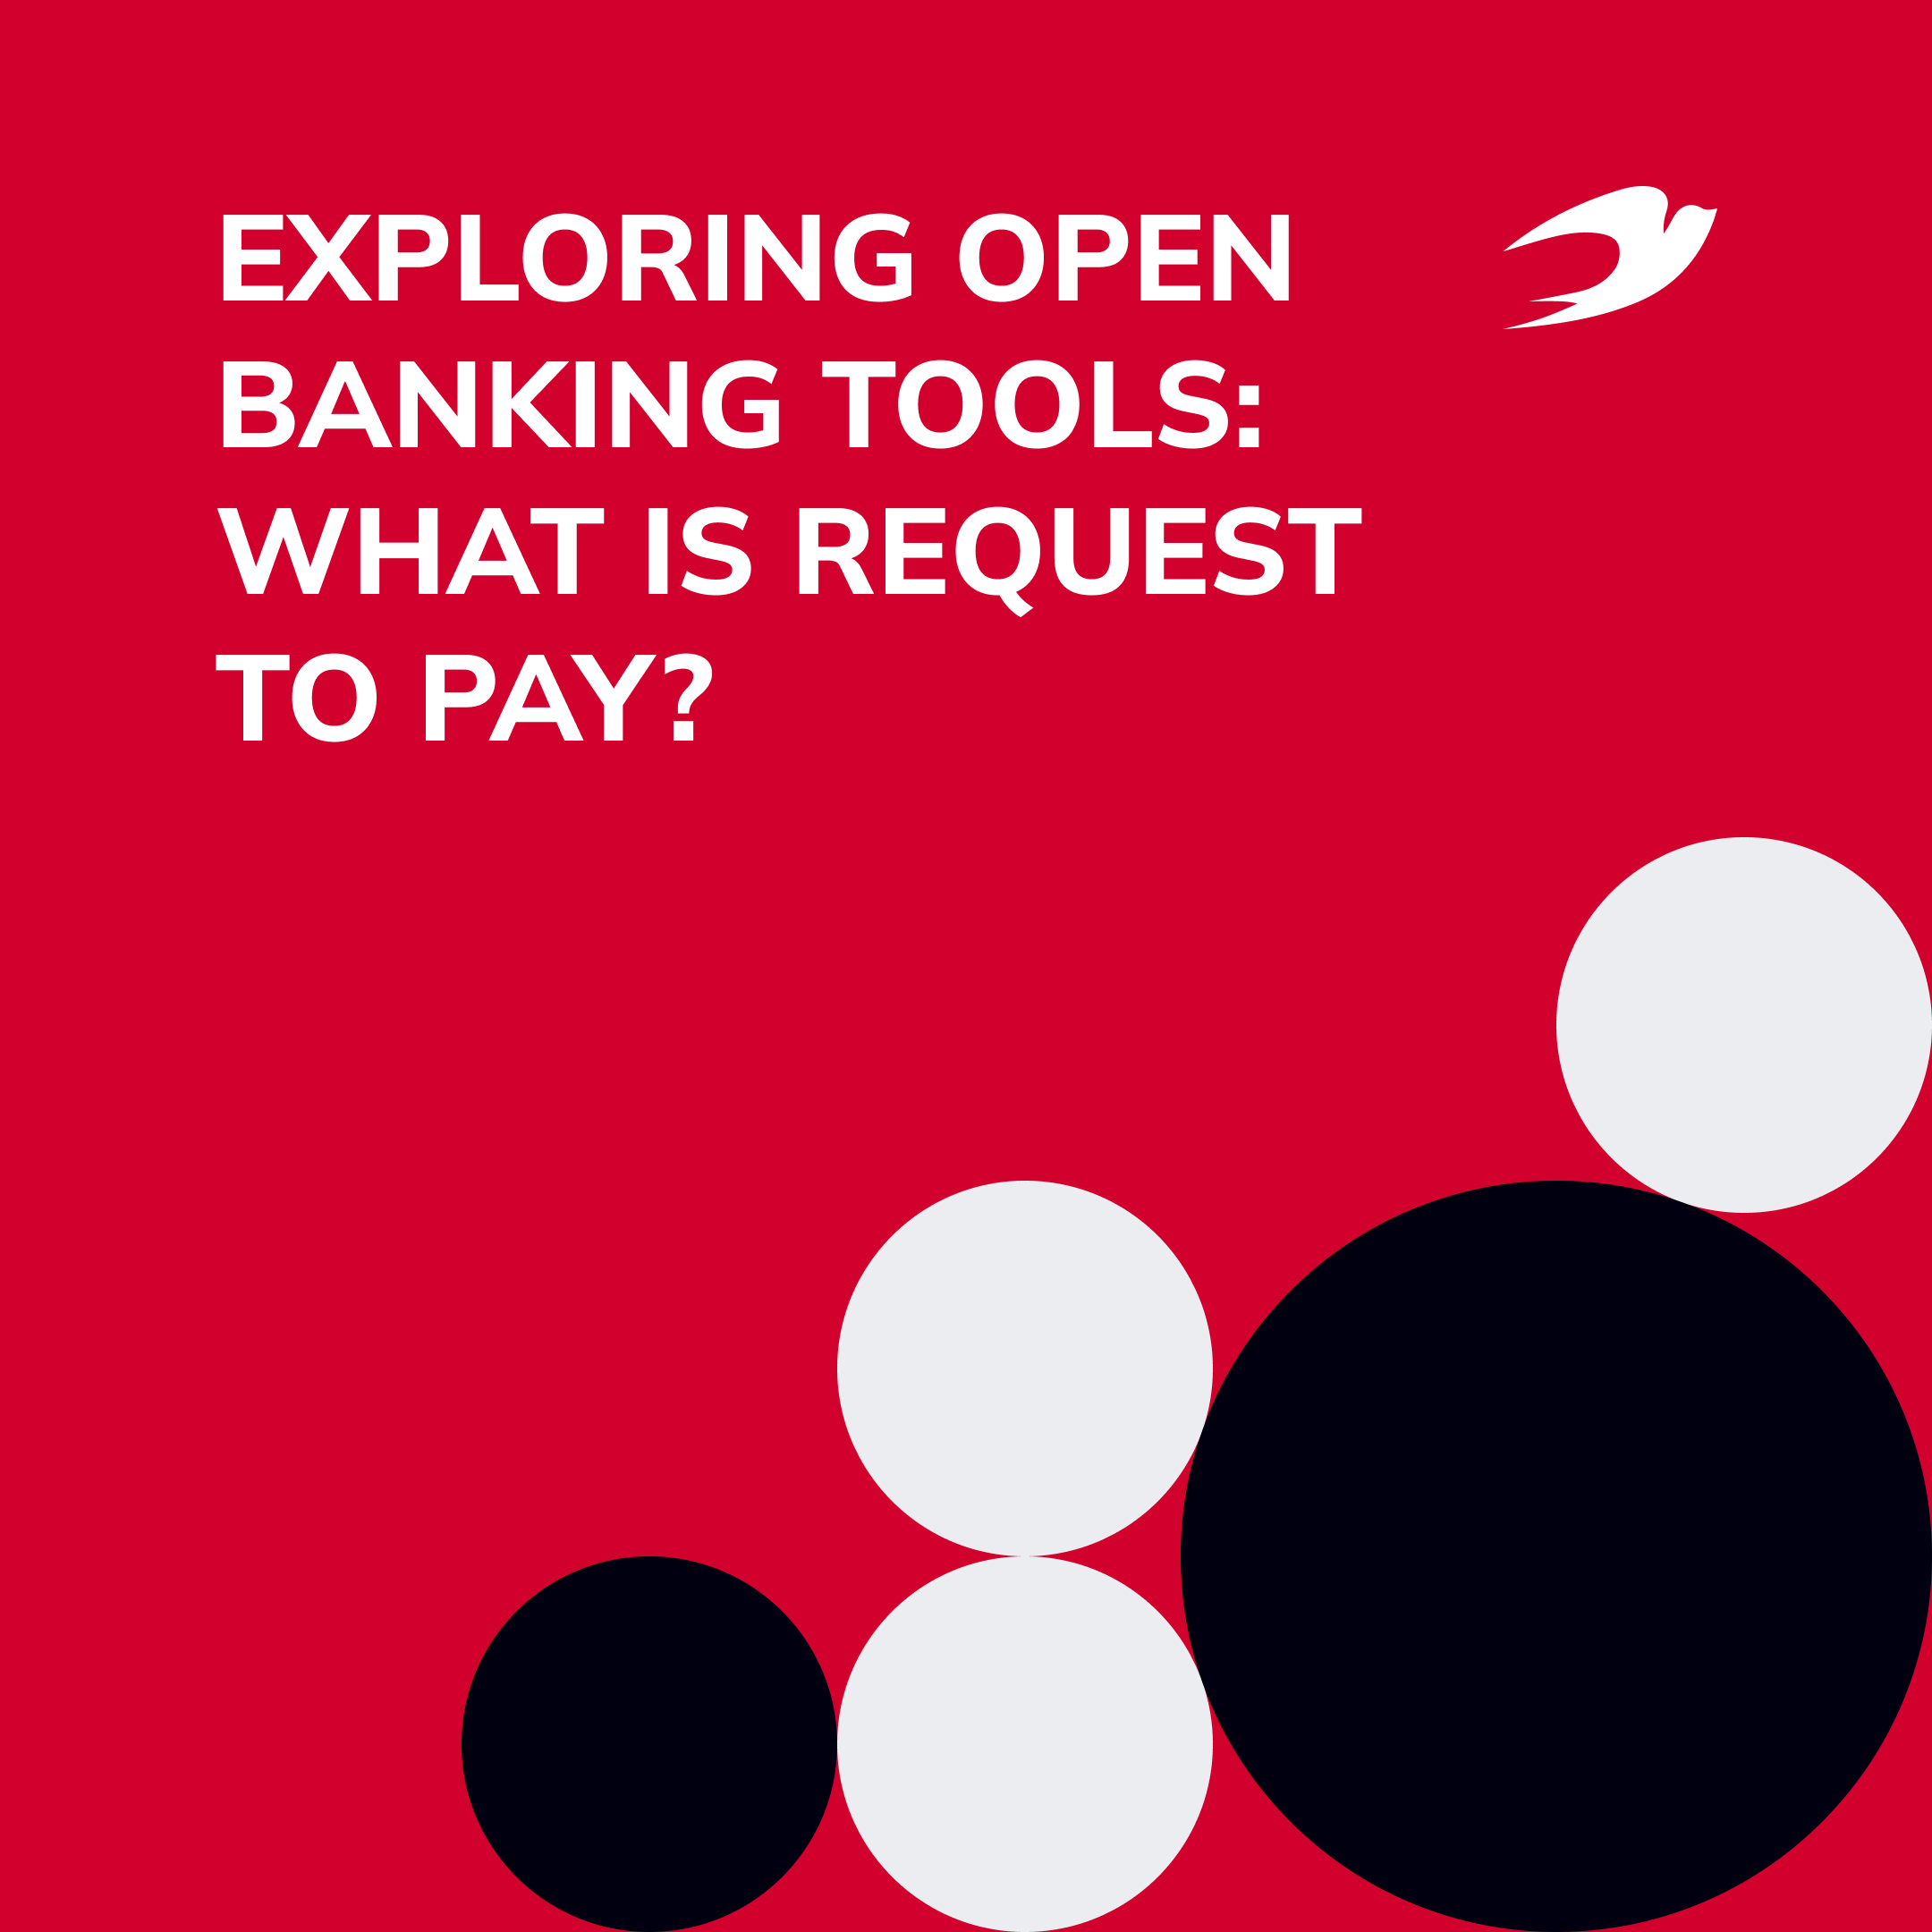 Exploring Open Banking Tools: What is Request To Pay?